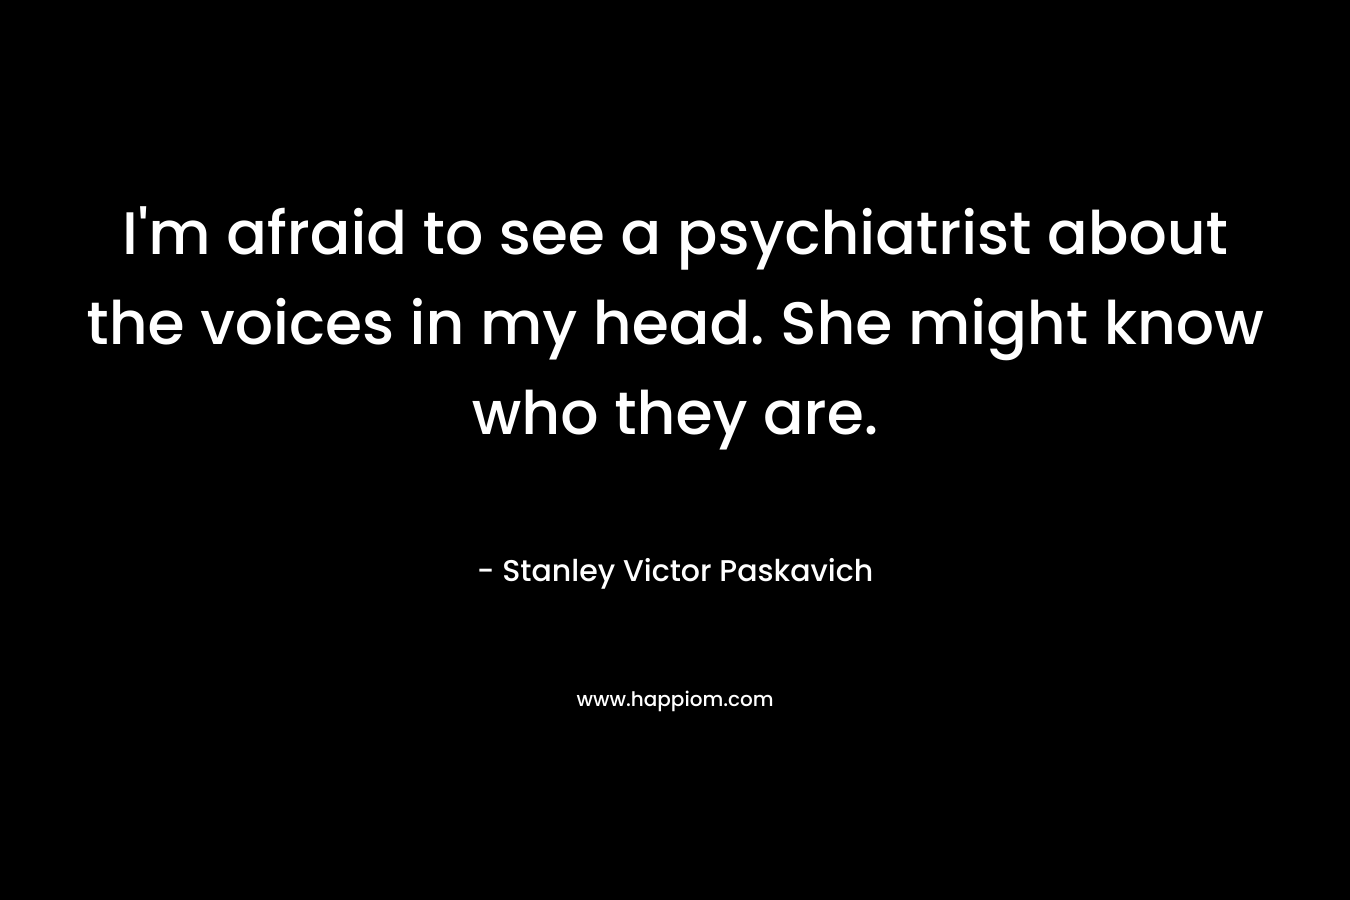 I’m afraid to see a psychiatrist about the voices in my head. She might know who they are. – Stanley Victor Paskavich